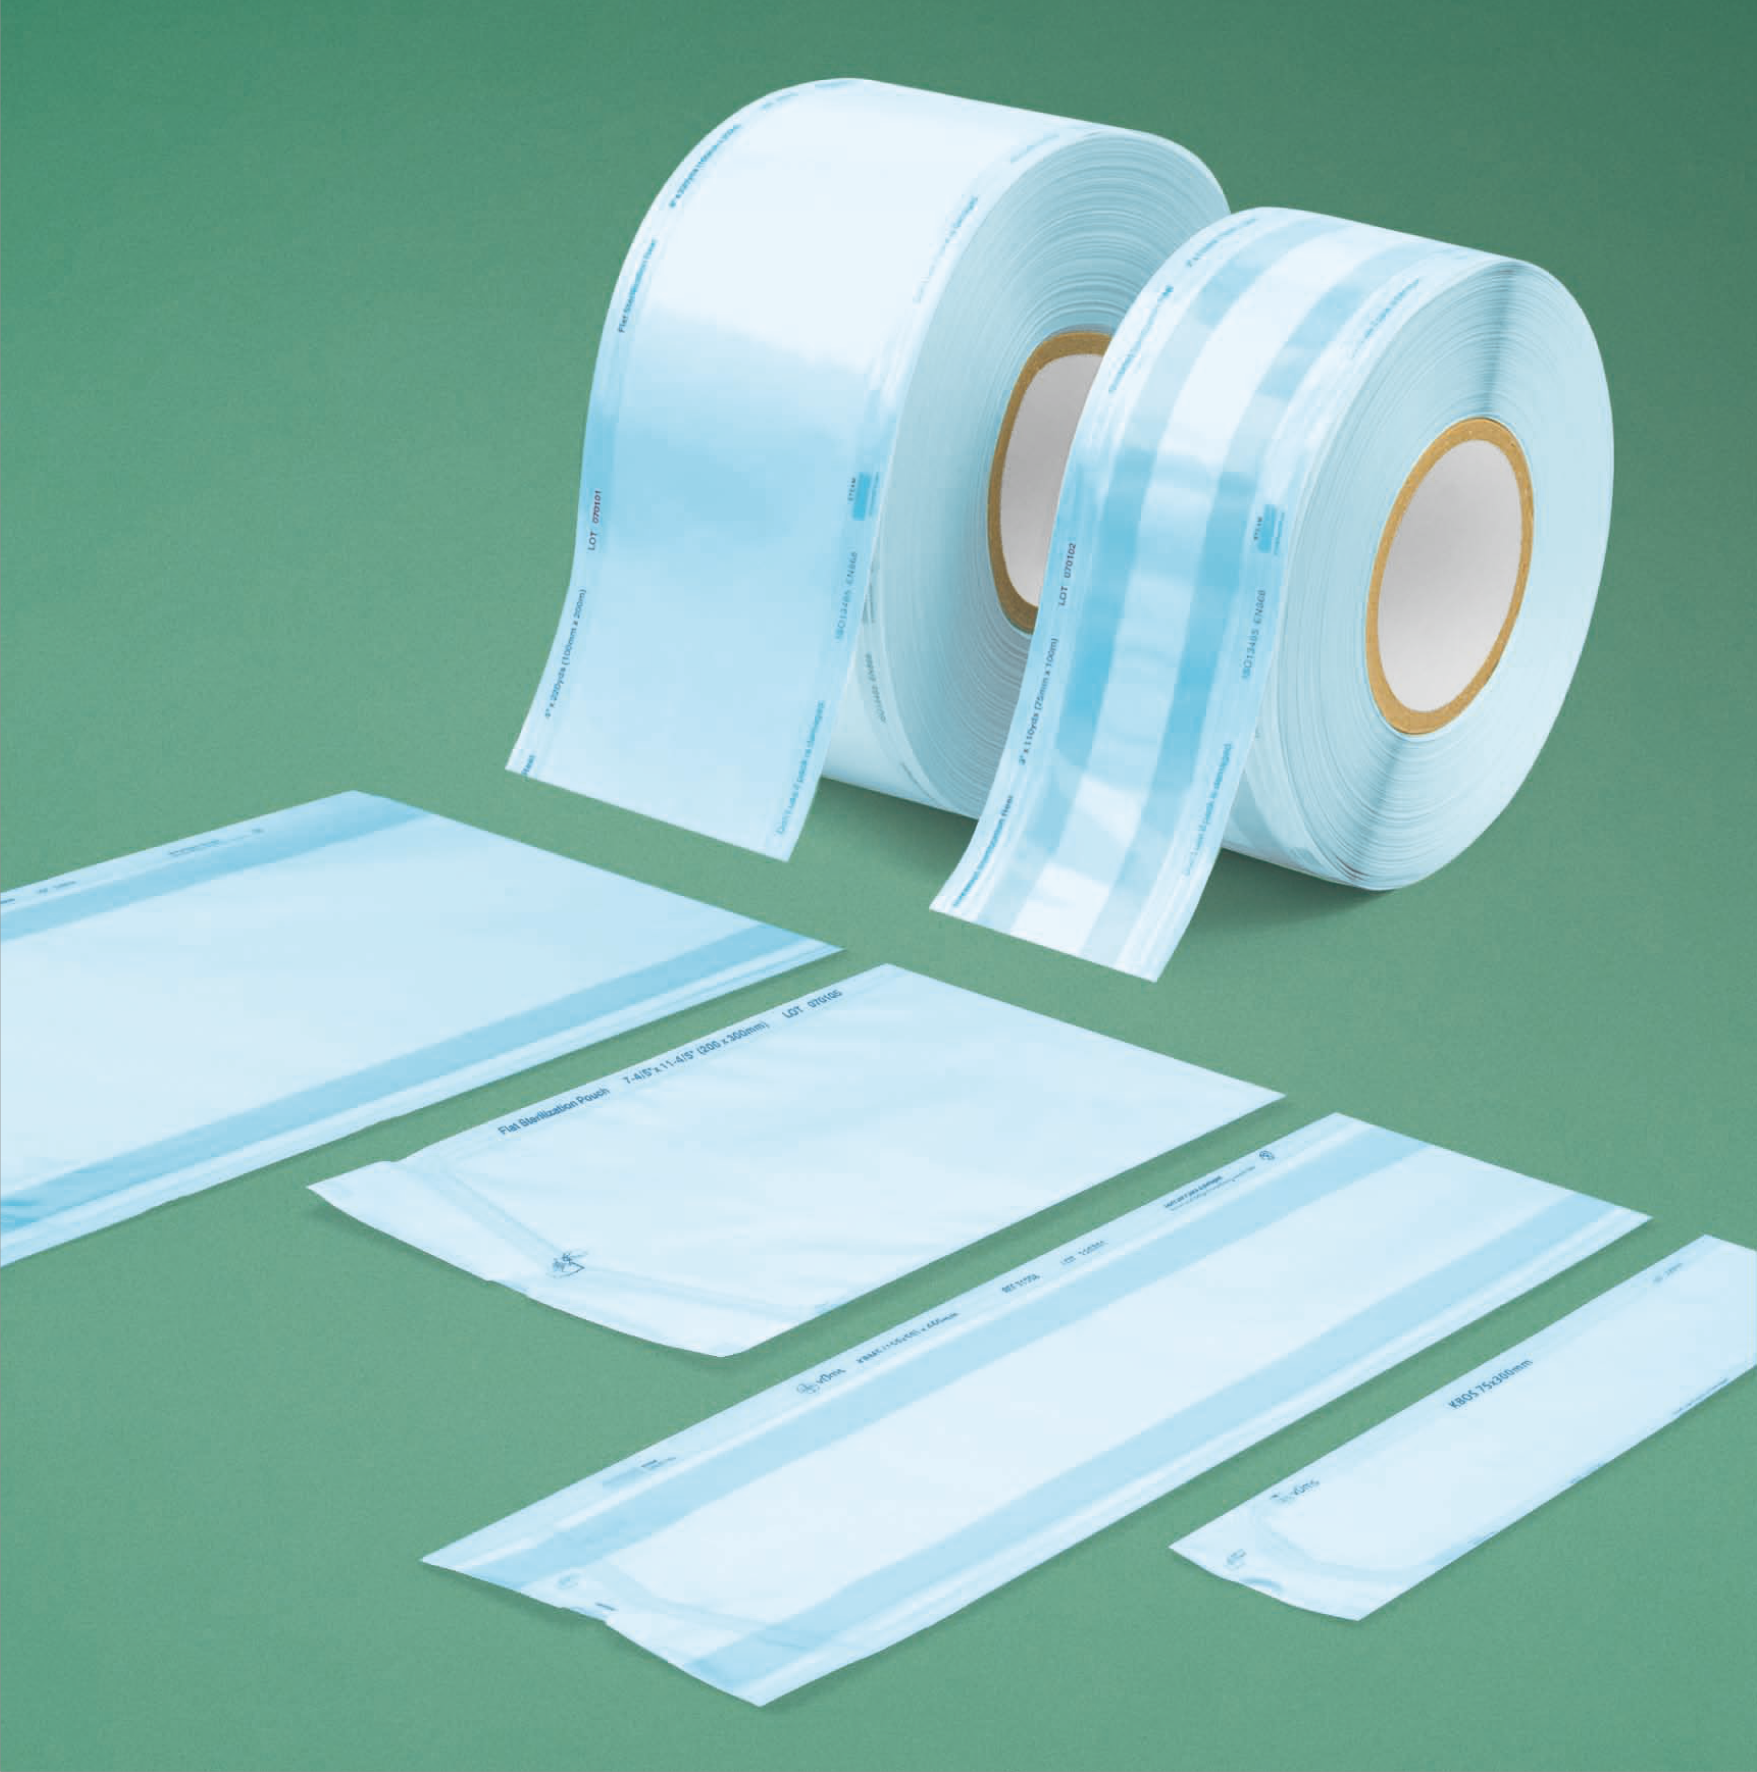 Supersoft and Standard crepe wrap for hospital packaging, available in different colors and sizes.